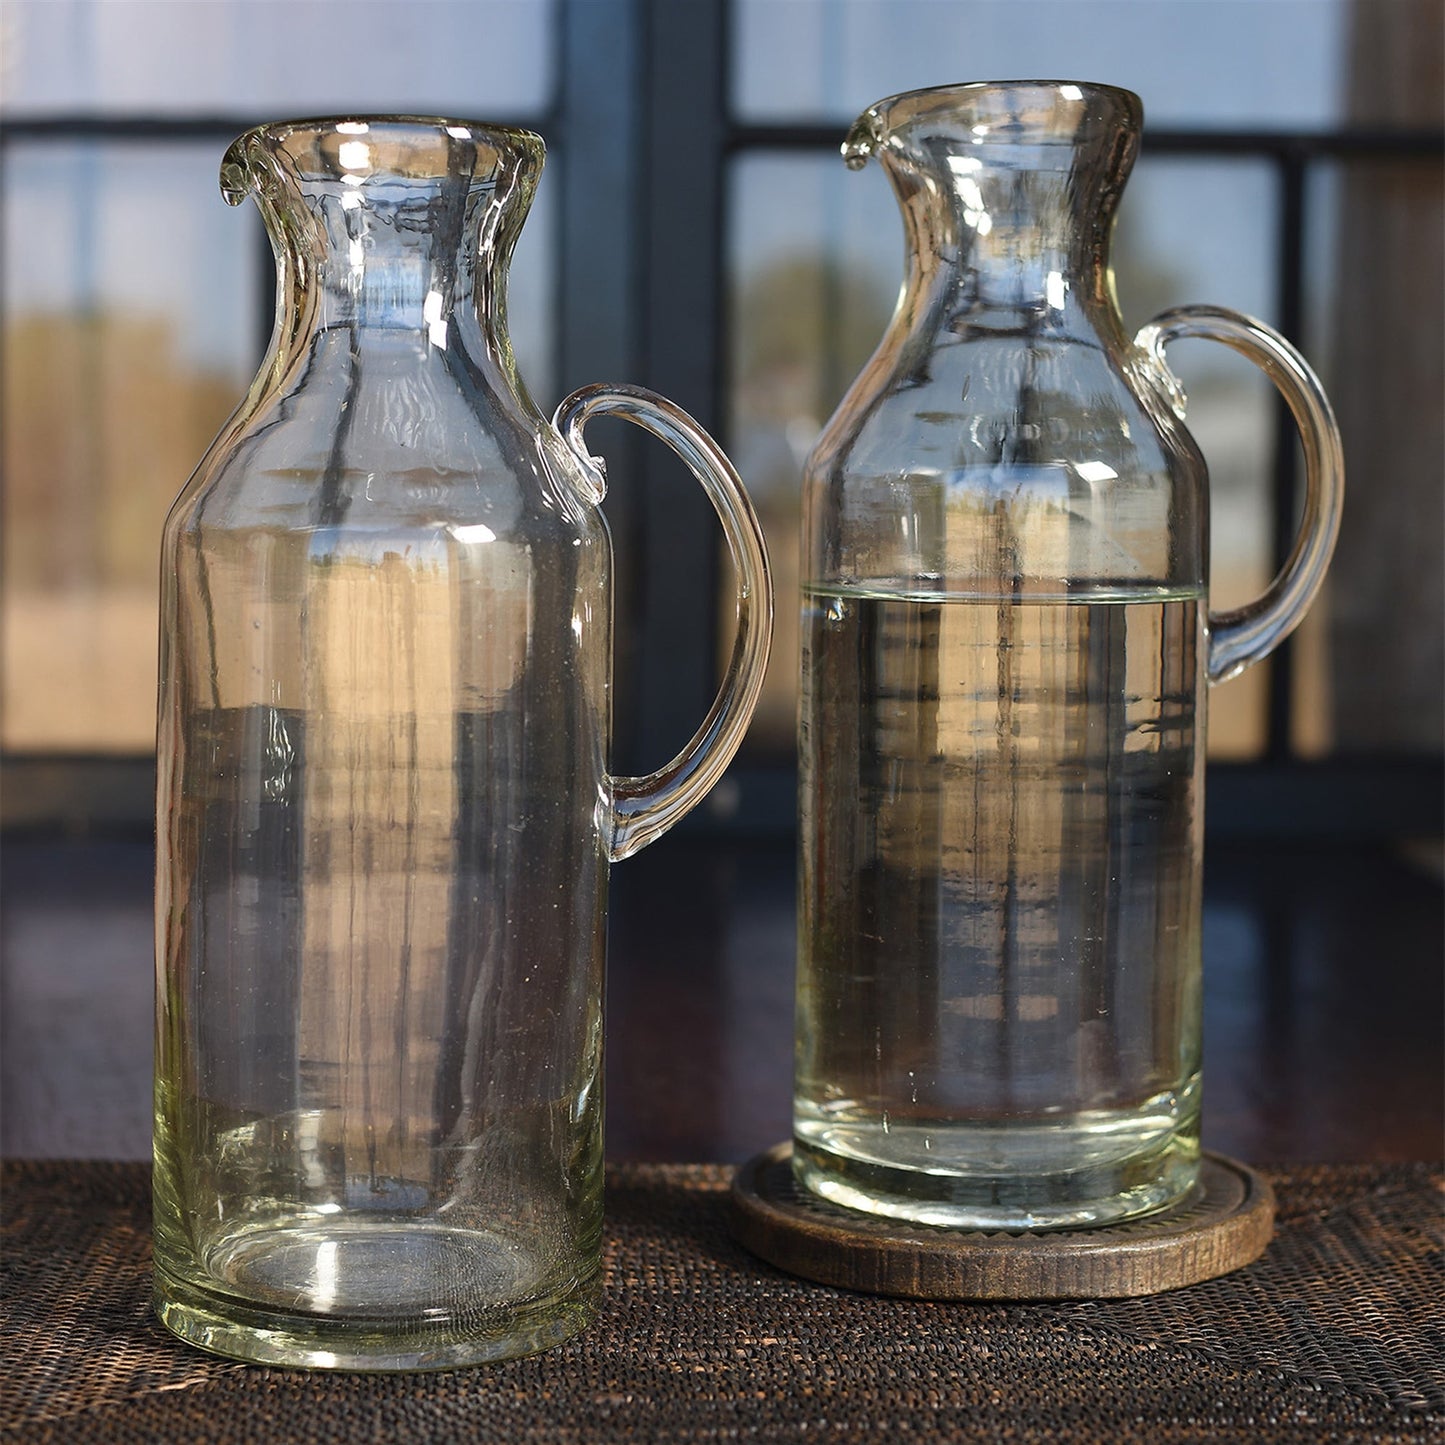 Cantina Recycled Glass Carafe (Set of 2) - EcoLuxe Furnishings